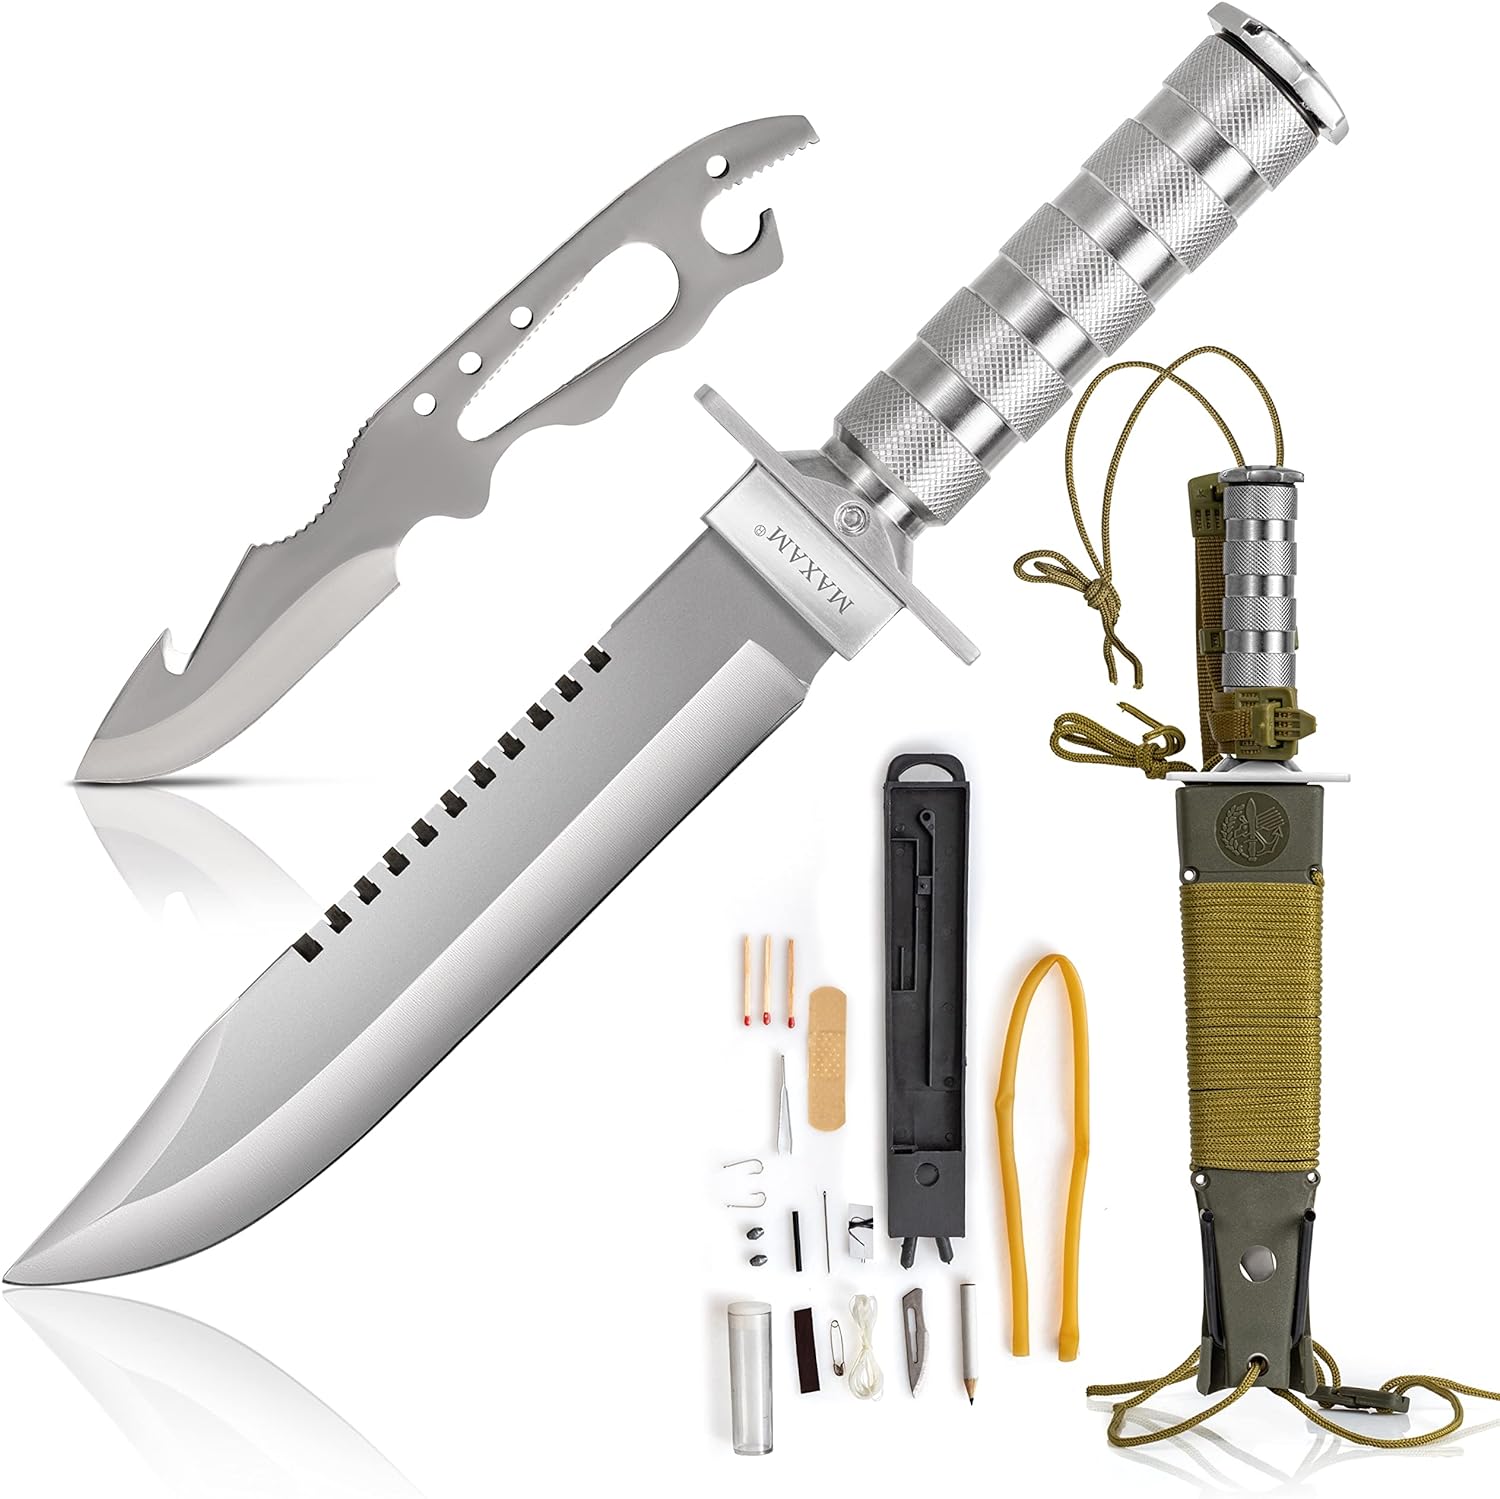 Top Survival Knives Roundup for Outdoor Enthusiasts